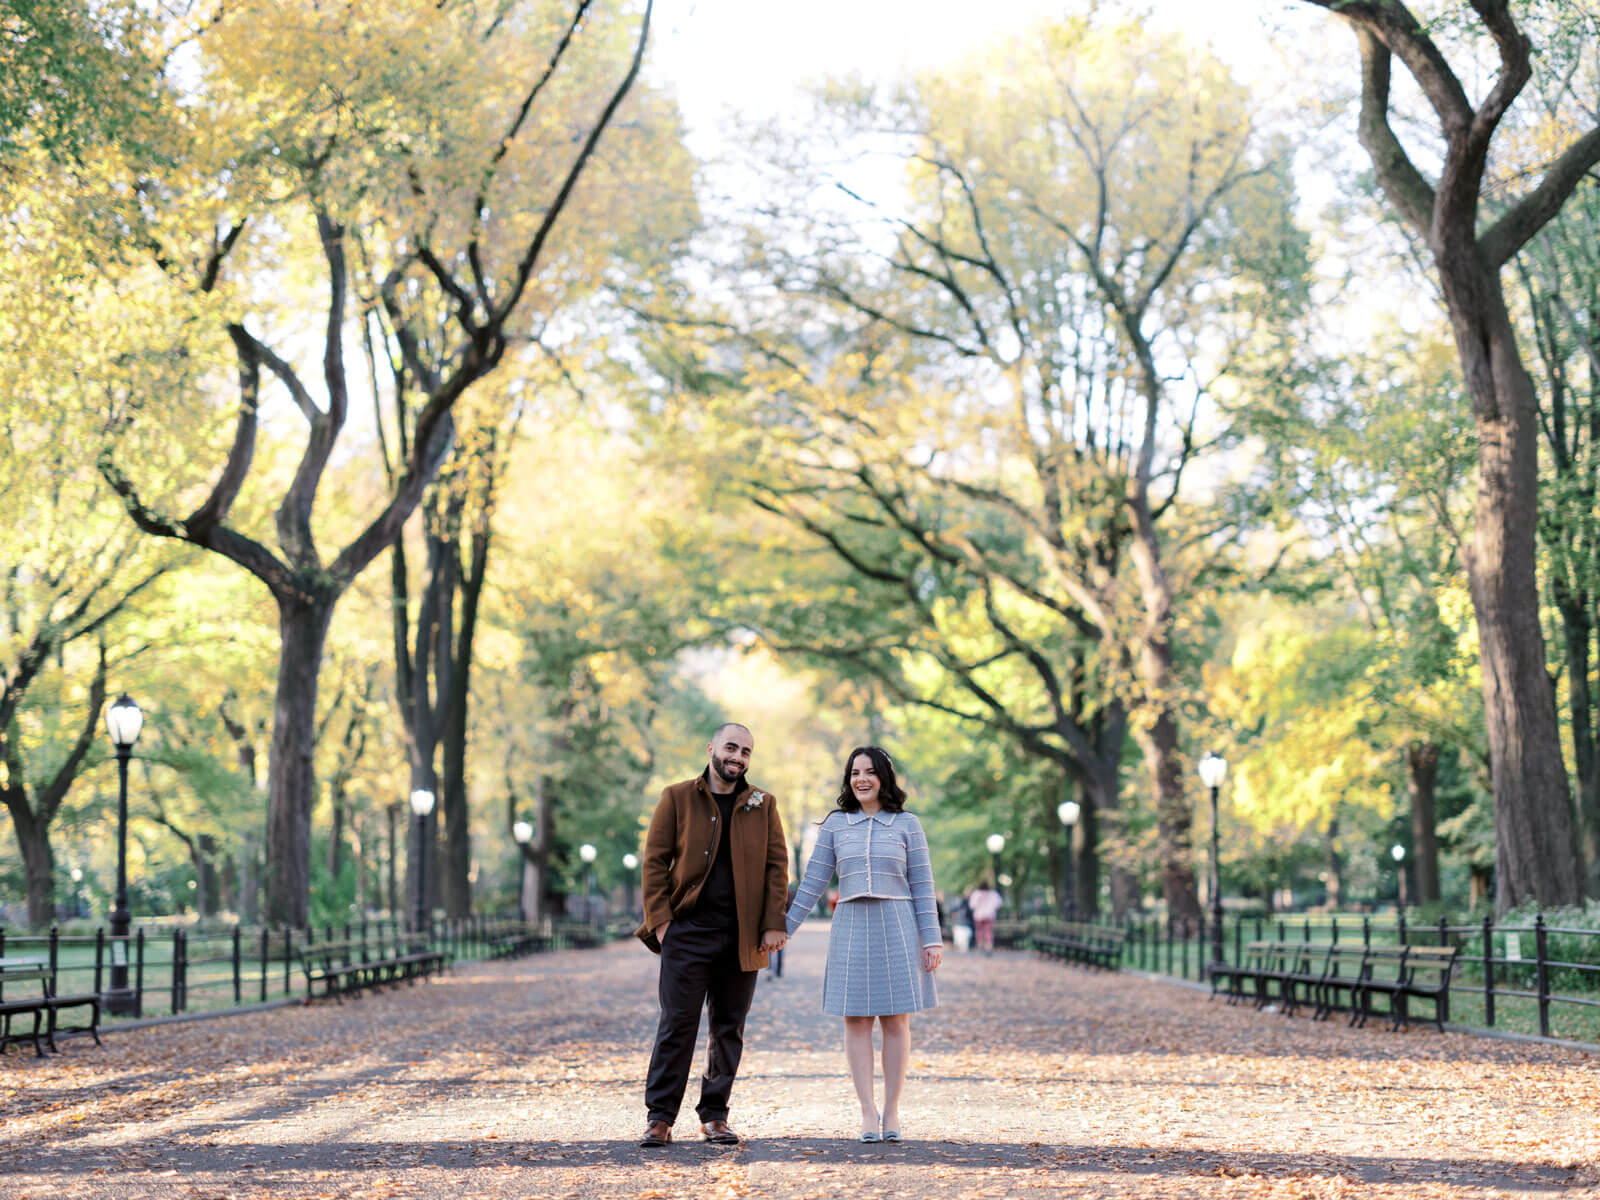 The engaged couple are standing in the middle of a park in NYC. Engagement photo image by Jenny Fu Studio